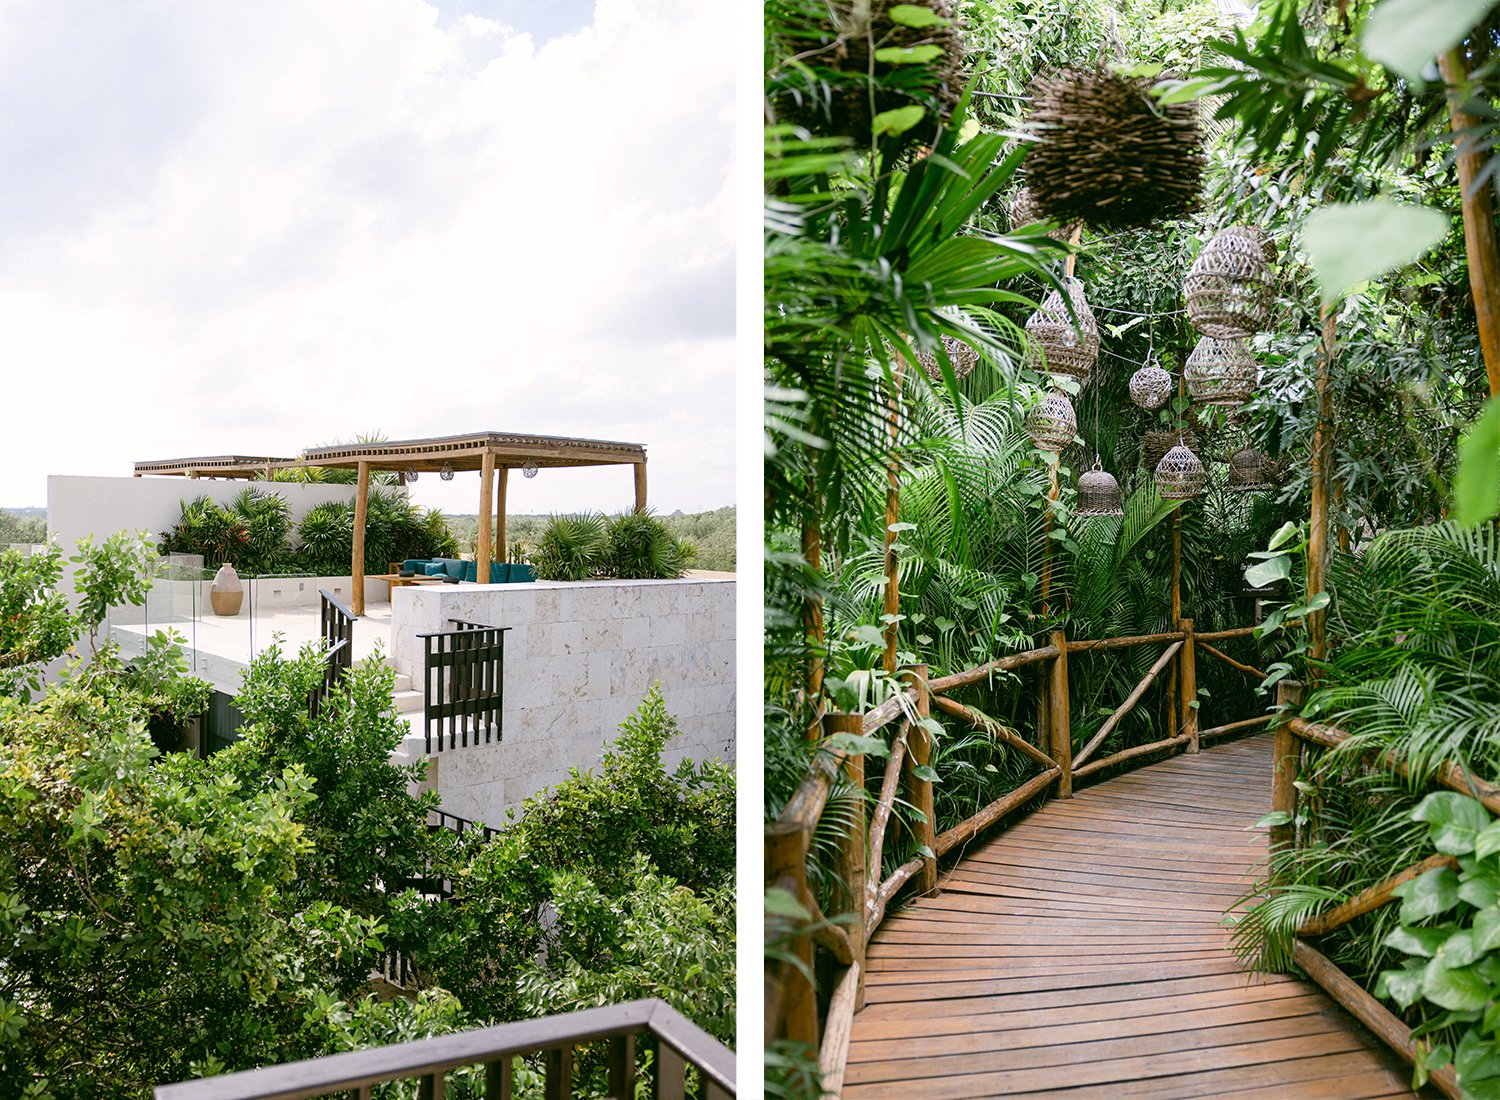 01 natural landscape with of the wedding venue with green tropical plants and rustic decoration at Rosewood Mayakoba Riviera Maya Cancun Mexico.JPG